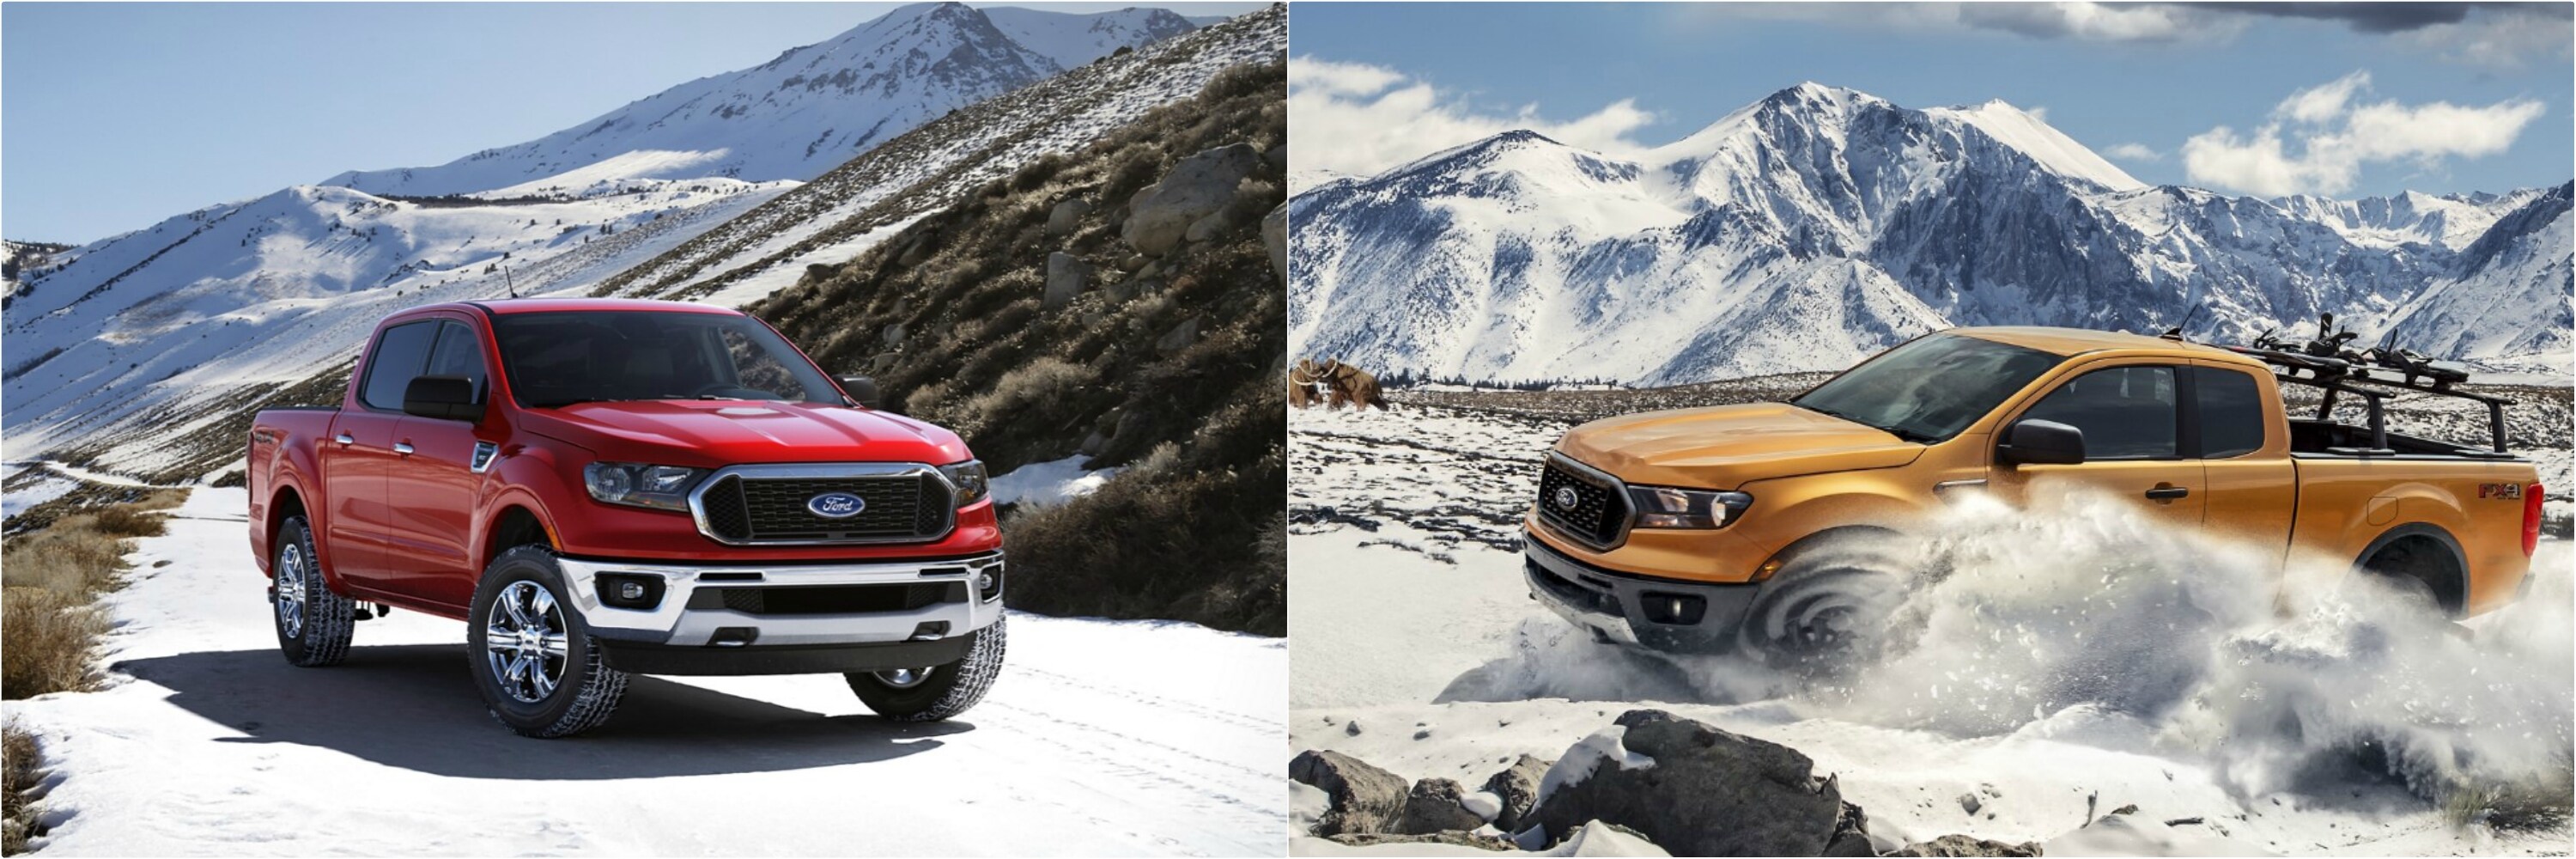 A red 2021 Ford Ranger parked on a snowy mountain road alongside an orange 2020 Ford Ranger driving fiercely in the snow